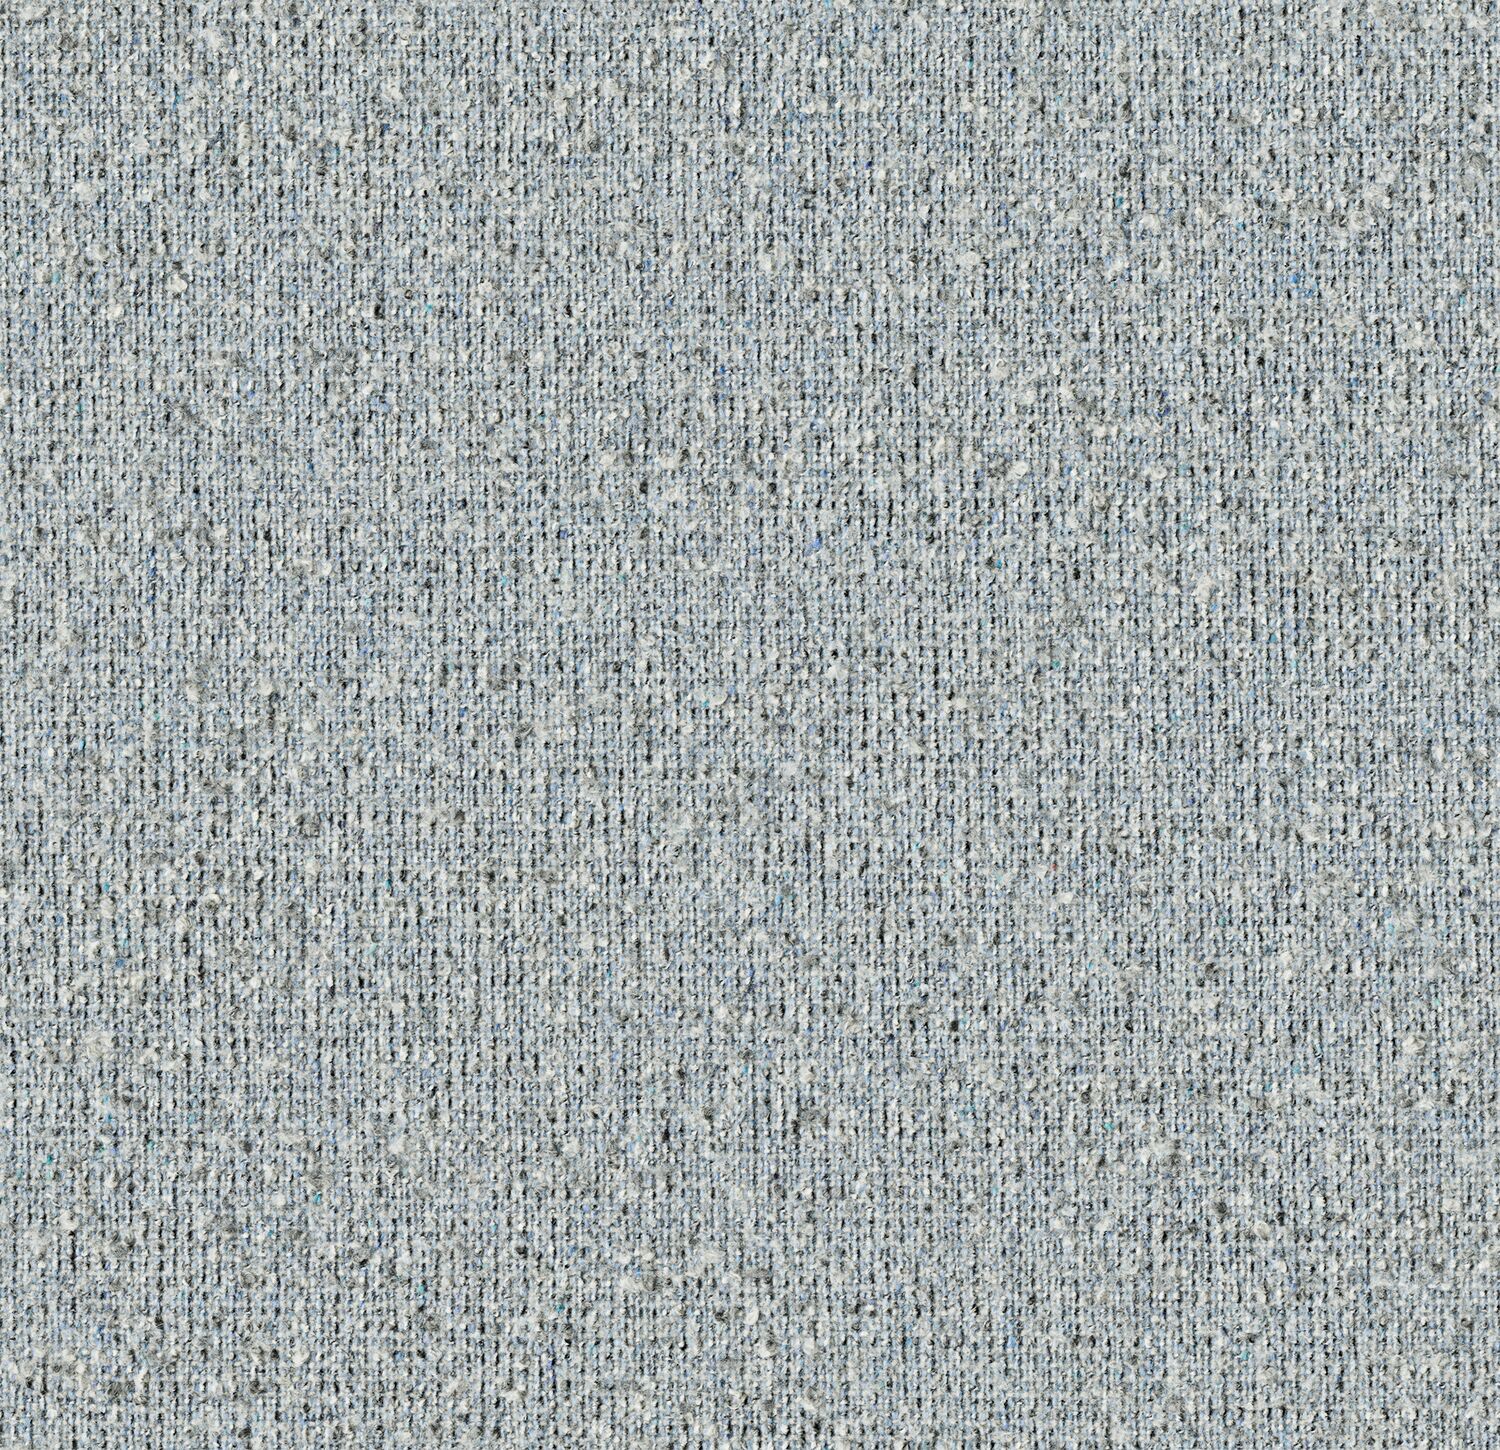 Everyday Boucle - Larkspur - 4111 - 16 Tileable Swatches